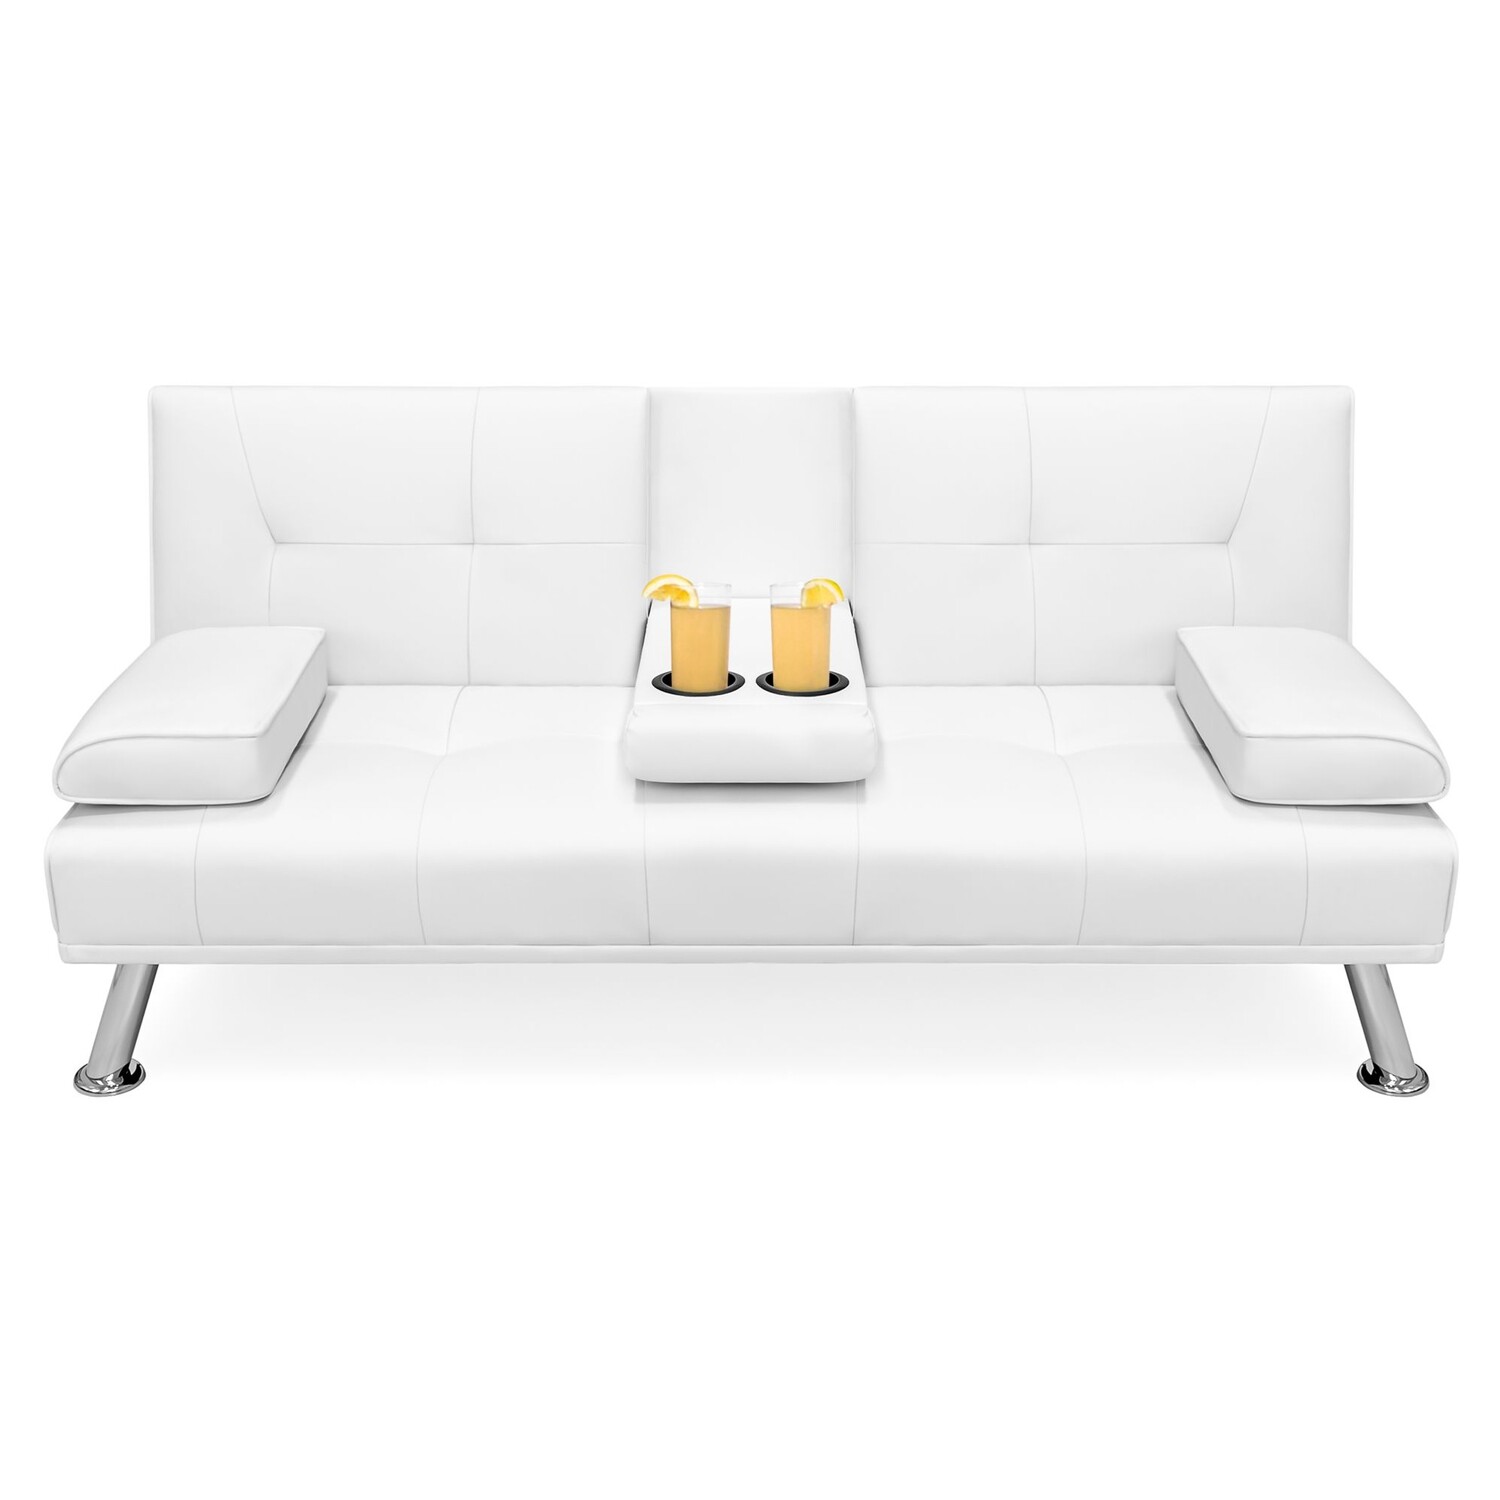 Modern Faux Leather Convertible Futon Sofa w/ Removable Armrests, Metal Legs, 2 Cupholders - White